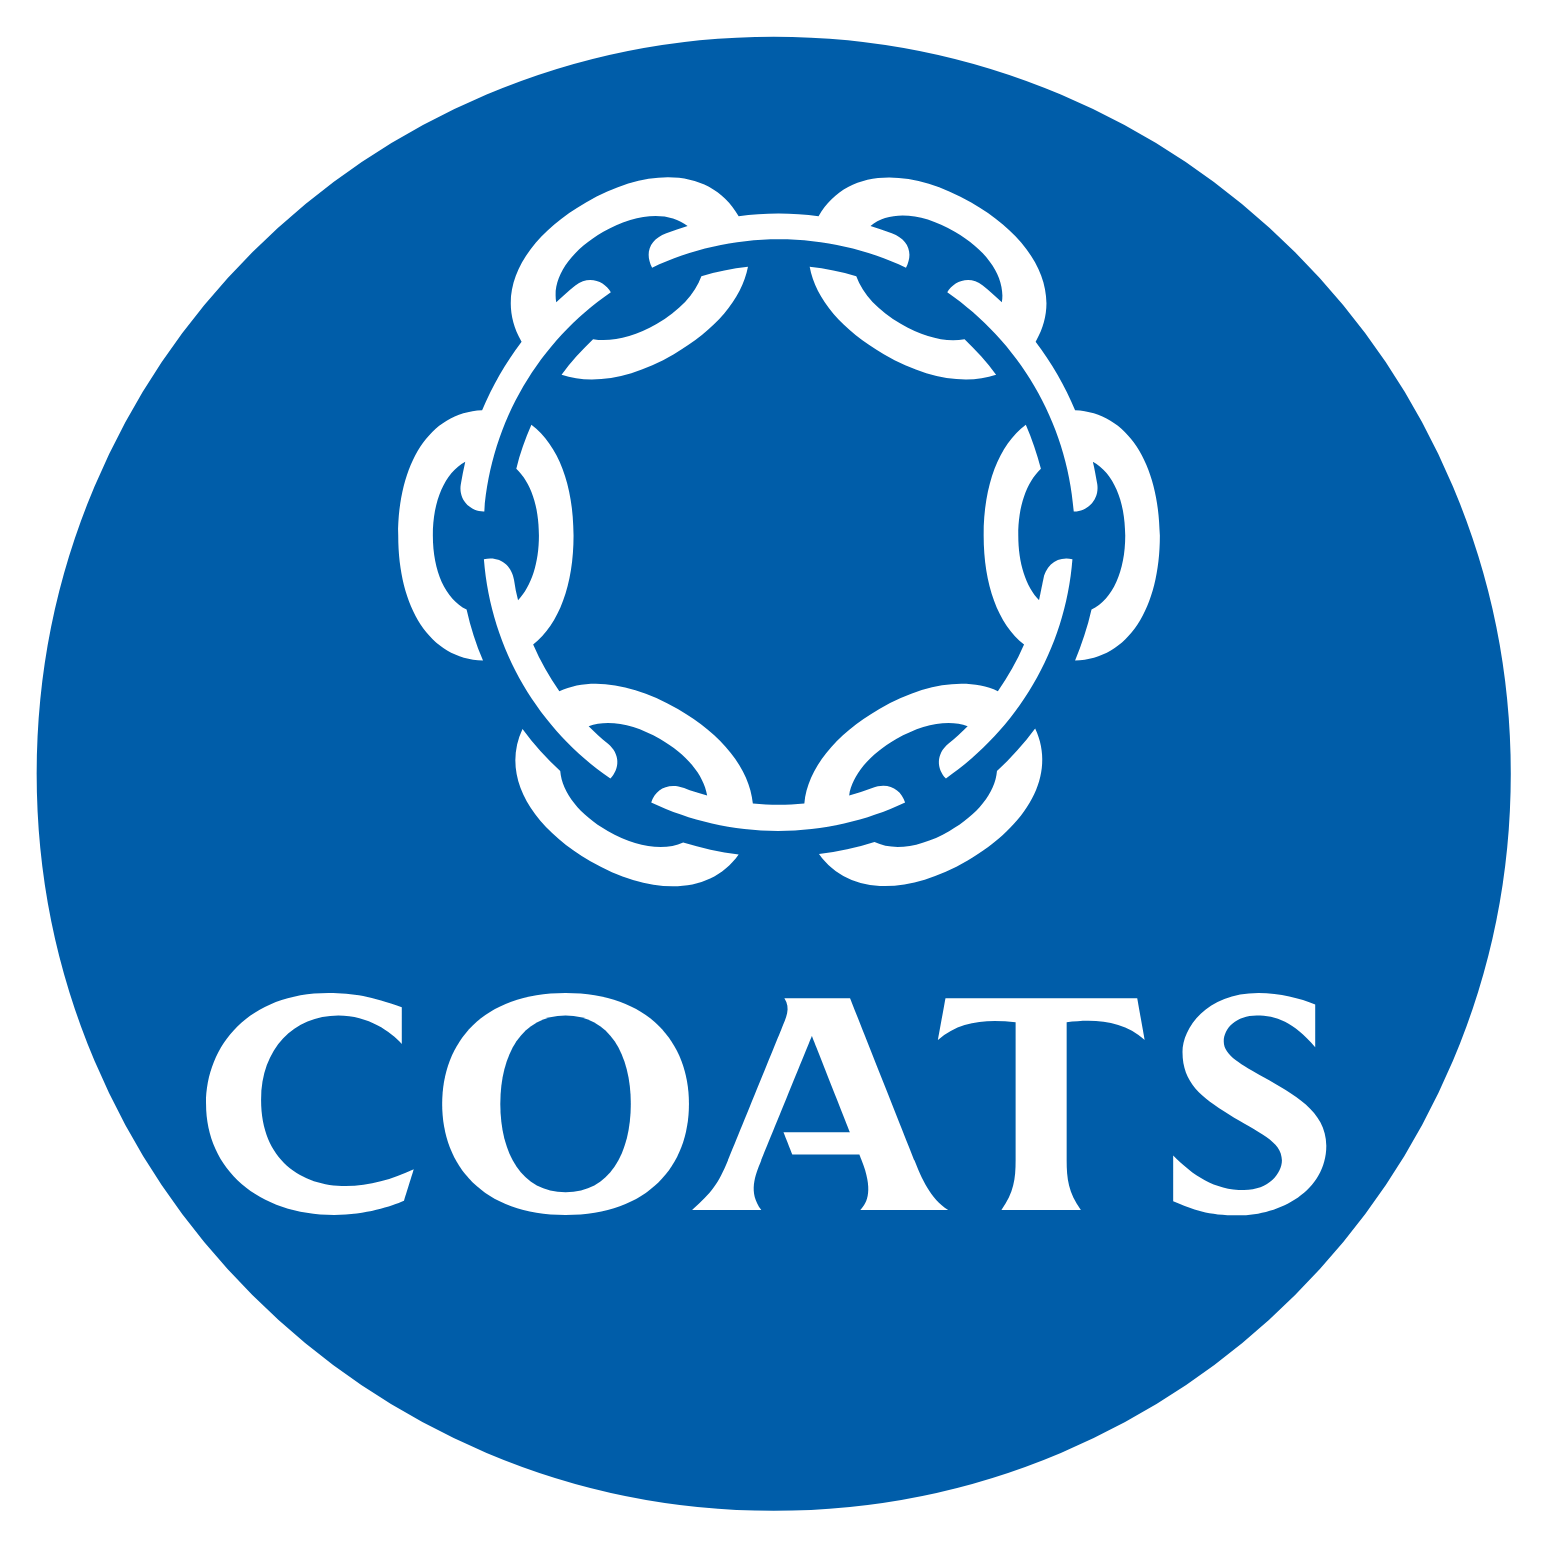 Coats Group logo in transparent PNG and vectorized SVG formats